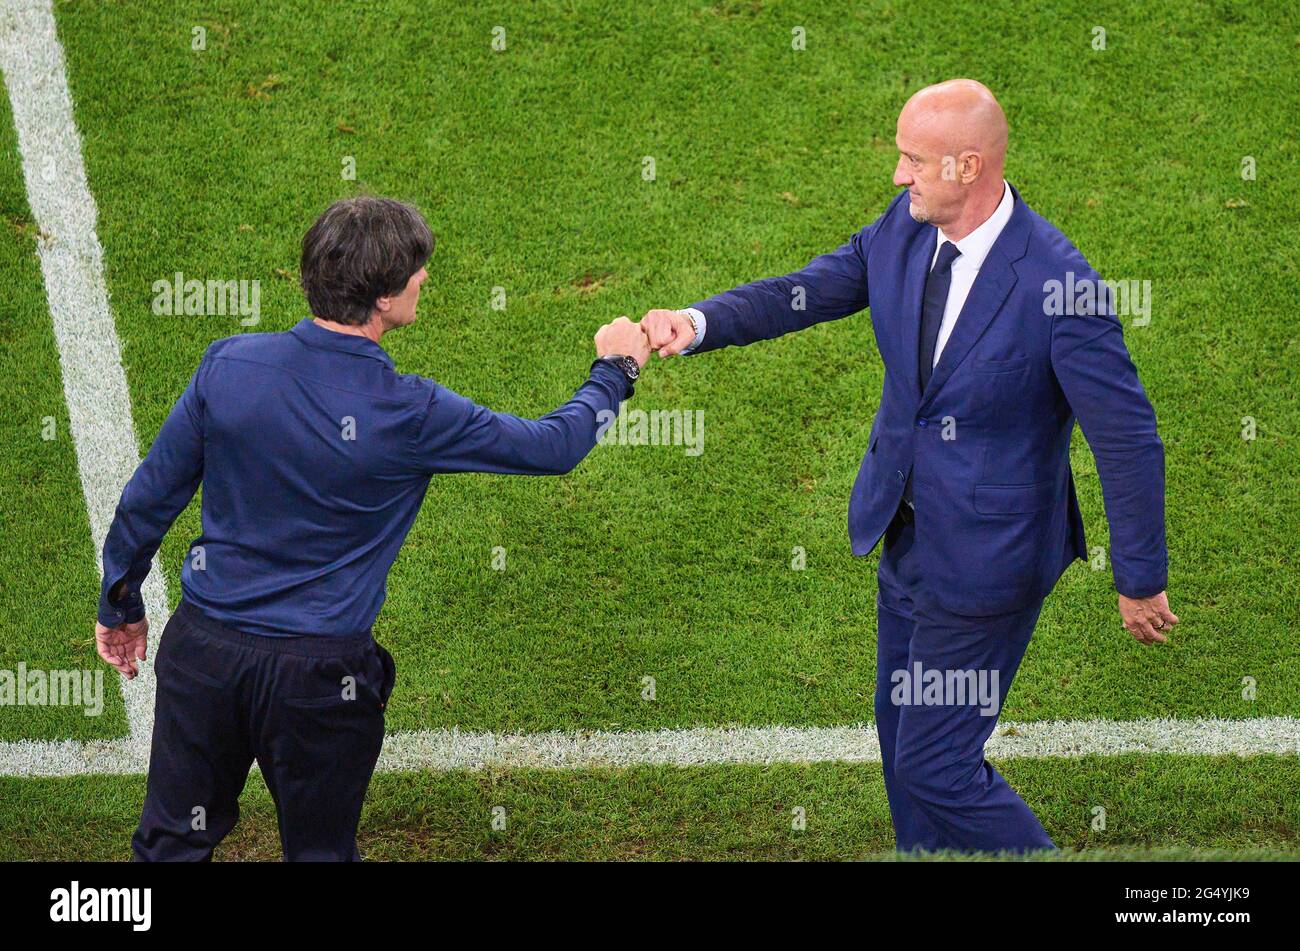 DFB headcoach Joachim Jogi LOEW, LÖW , Bundestrainer, Nationaltrainer, Marco Rossi, head coach, HUN,  in the Group F match GERMANY - HUNGARY 2-2 at the football UEFA European Championships 2020 in Season 2020/2021 on June 23, 2021  in Munich, Germany. © Peter Schatz / Alamy Live News Stock Photo